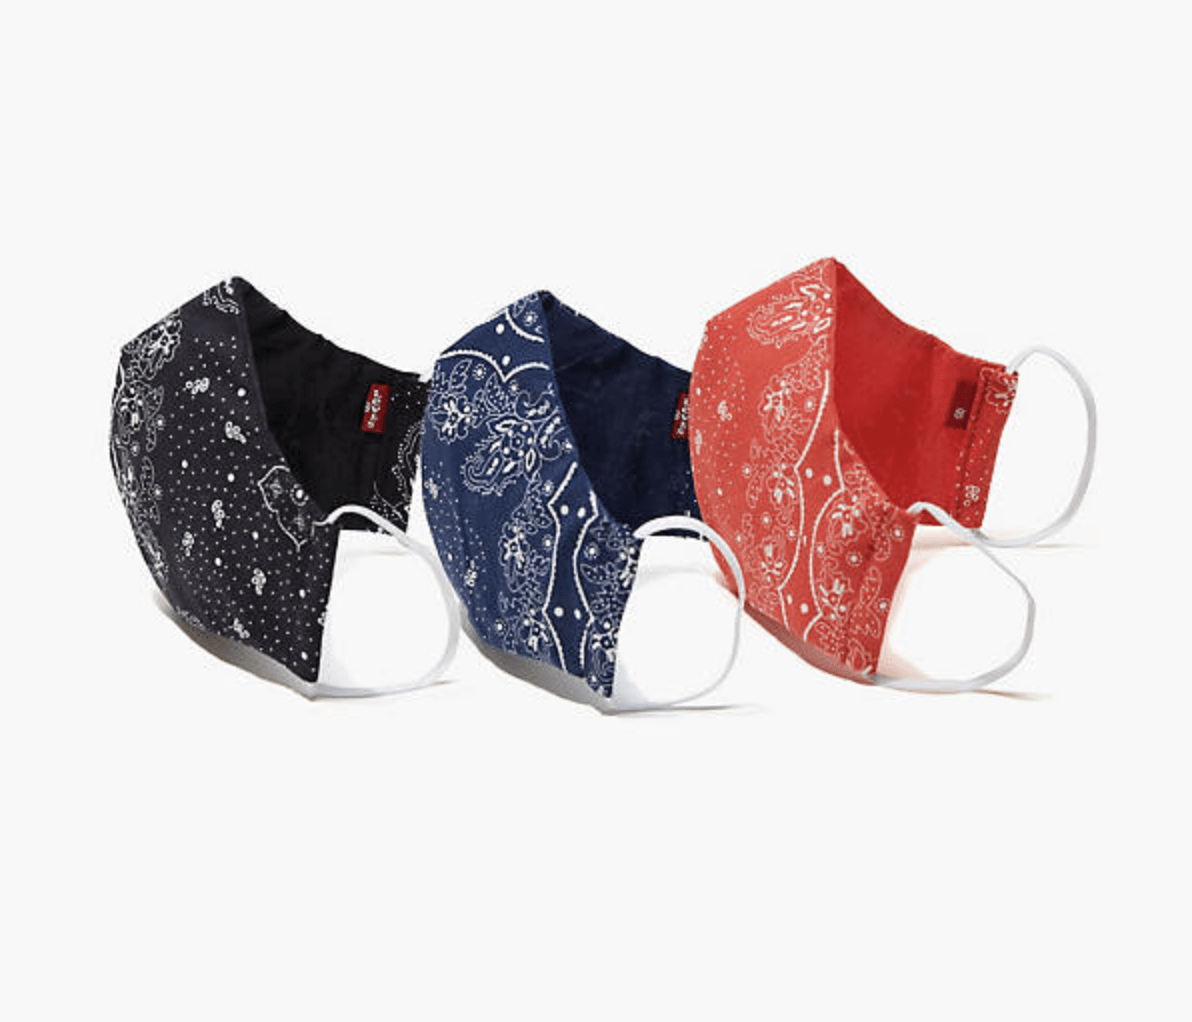 Levi's reusable face masks are now available on Amazon